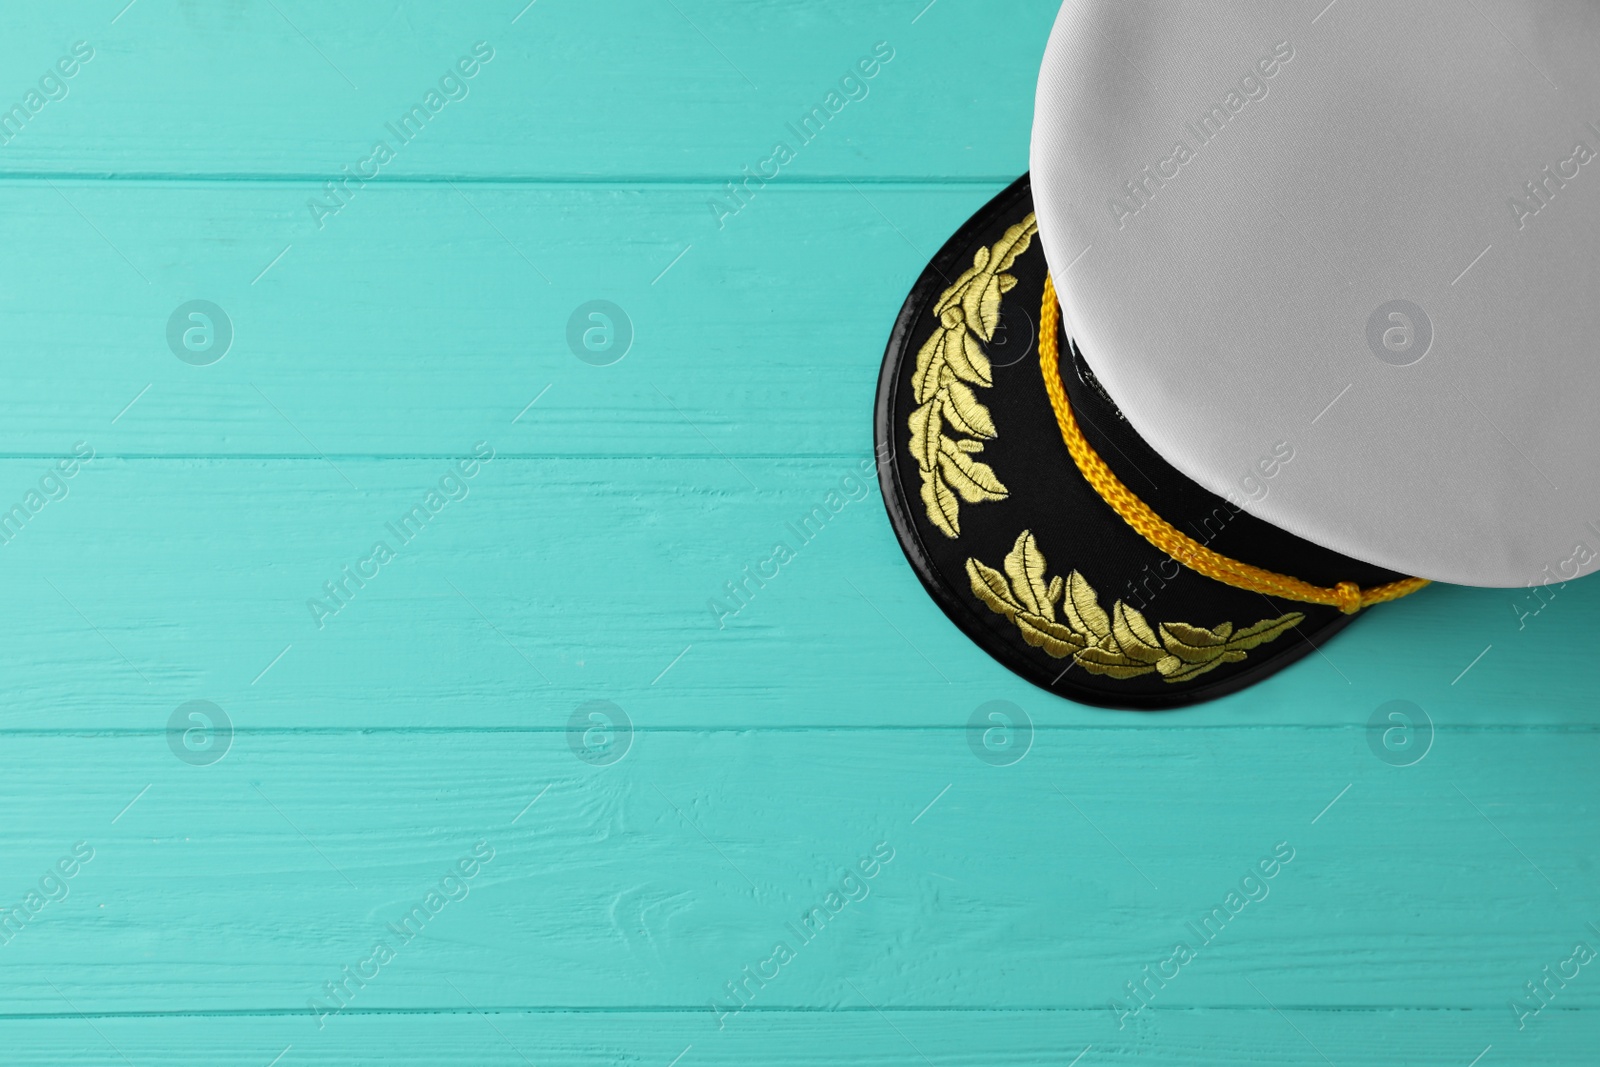 Photo of Peaked cap with accessories on turquoise wooden background, top view. Space for text